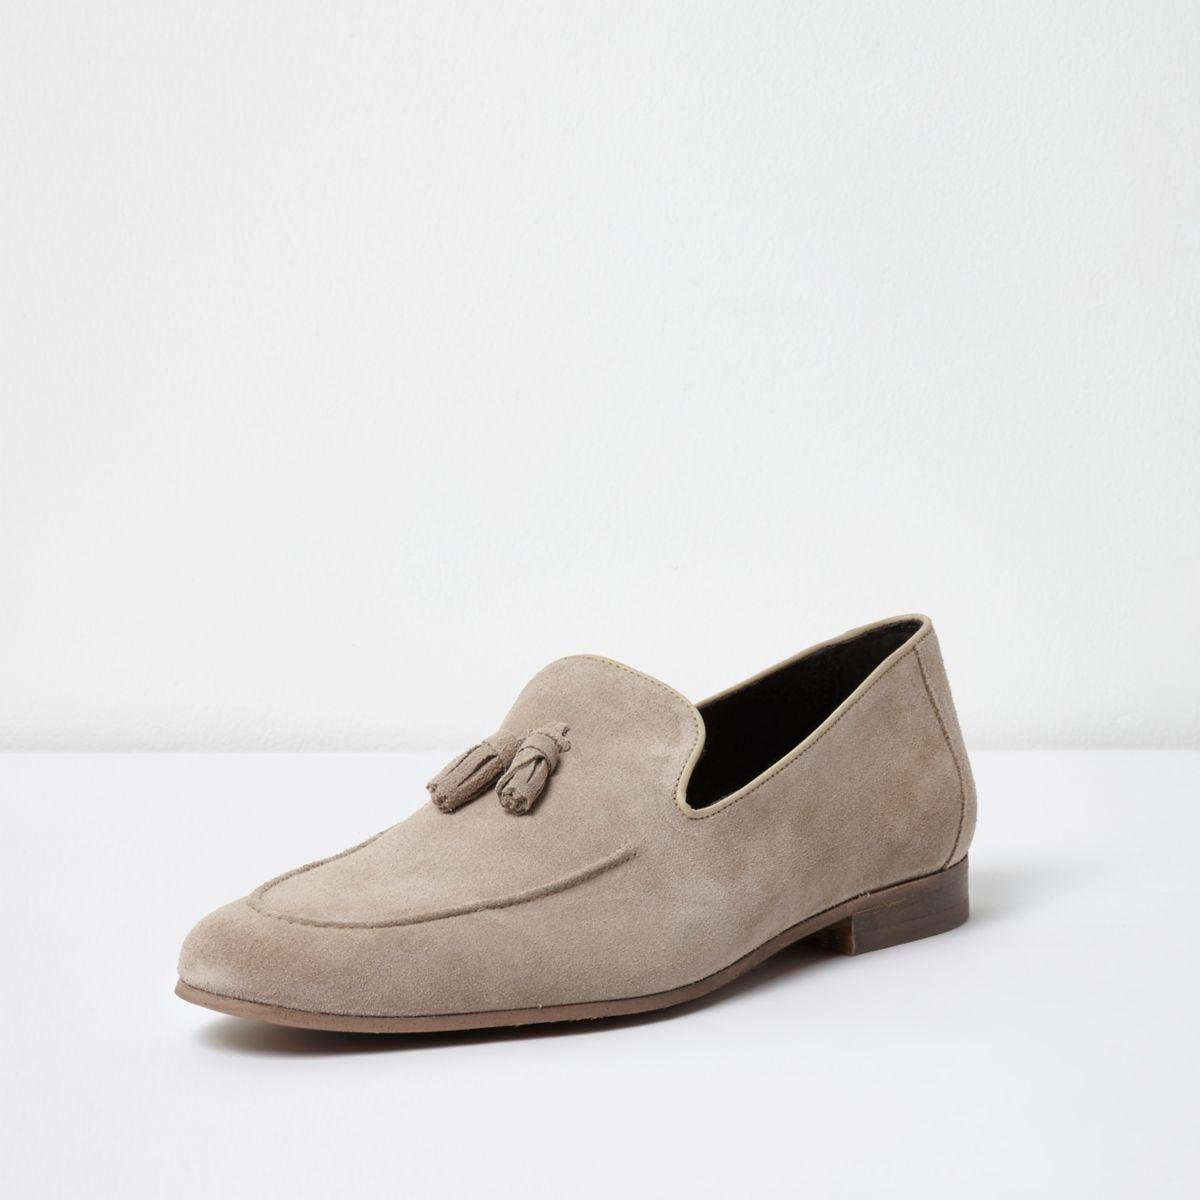 River Island Stone Suede Tassel Loafers 